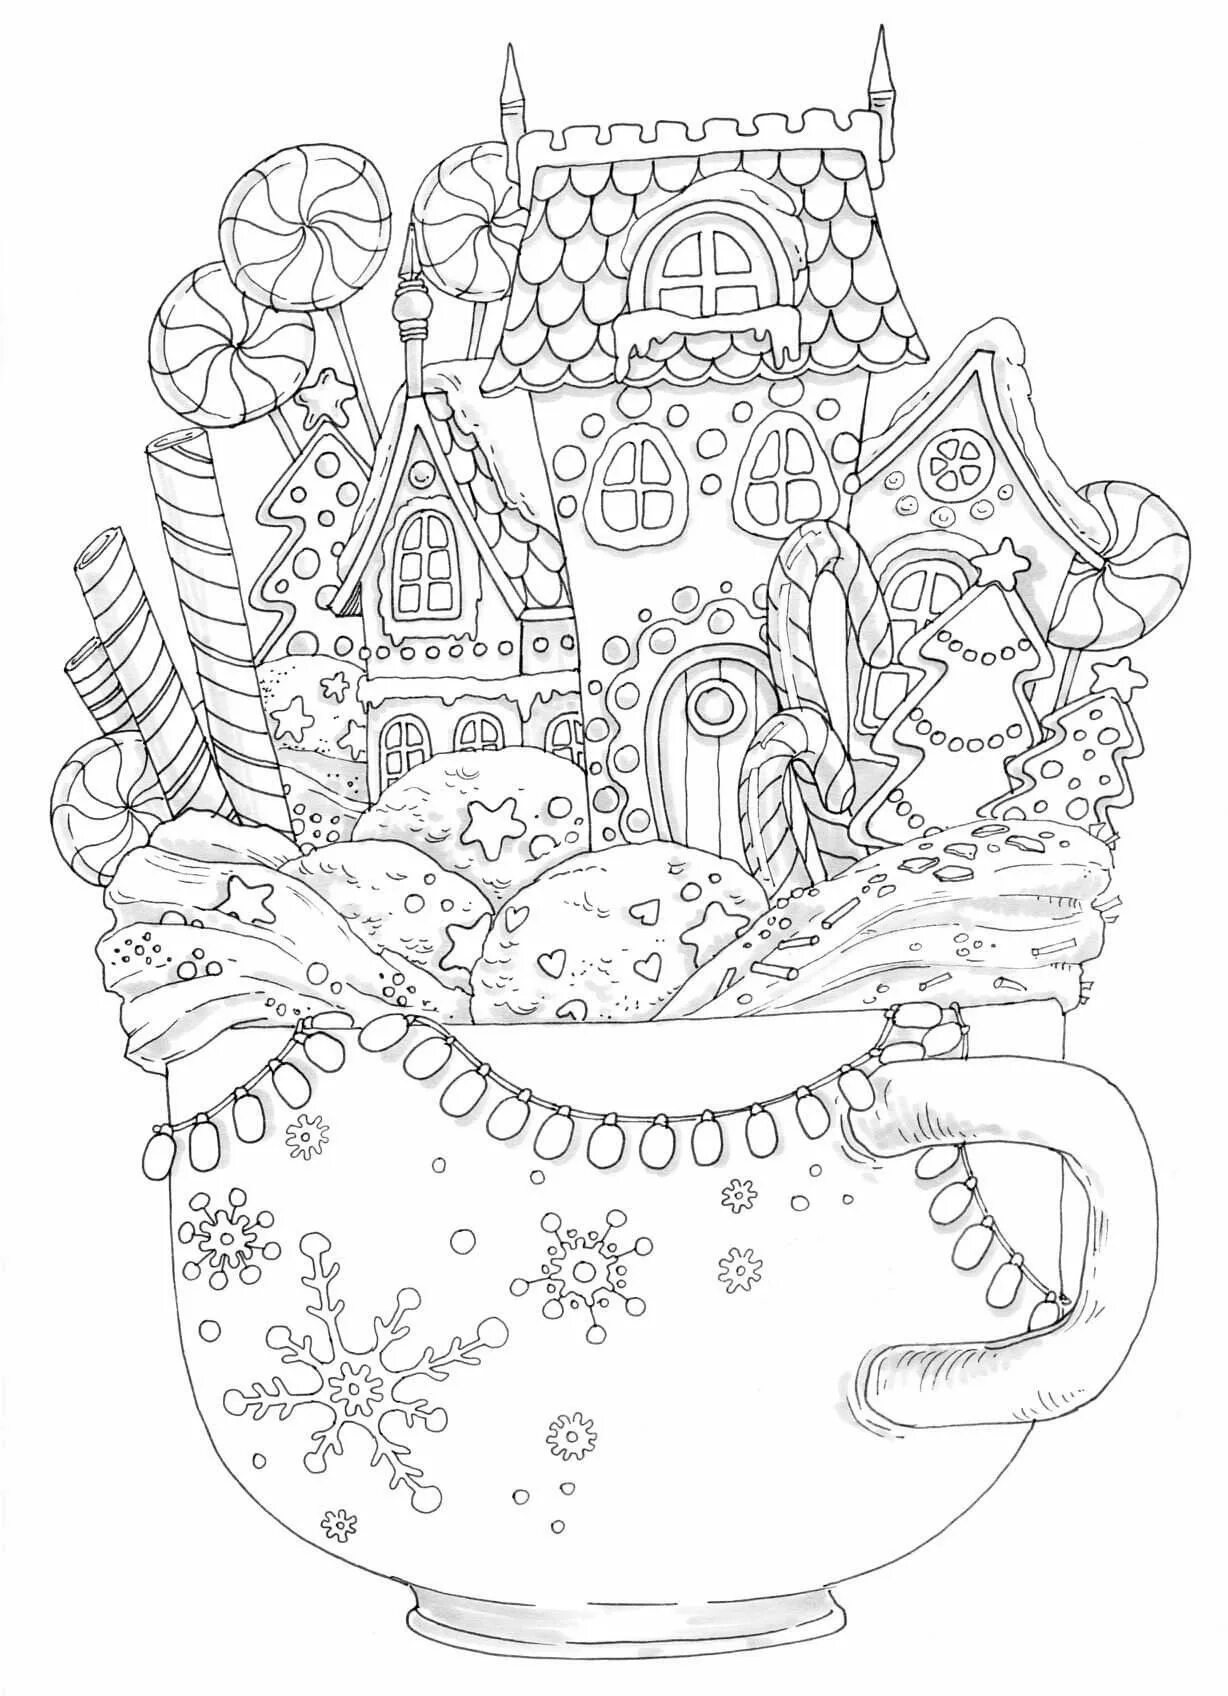 Happy new year coloring page